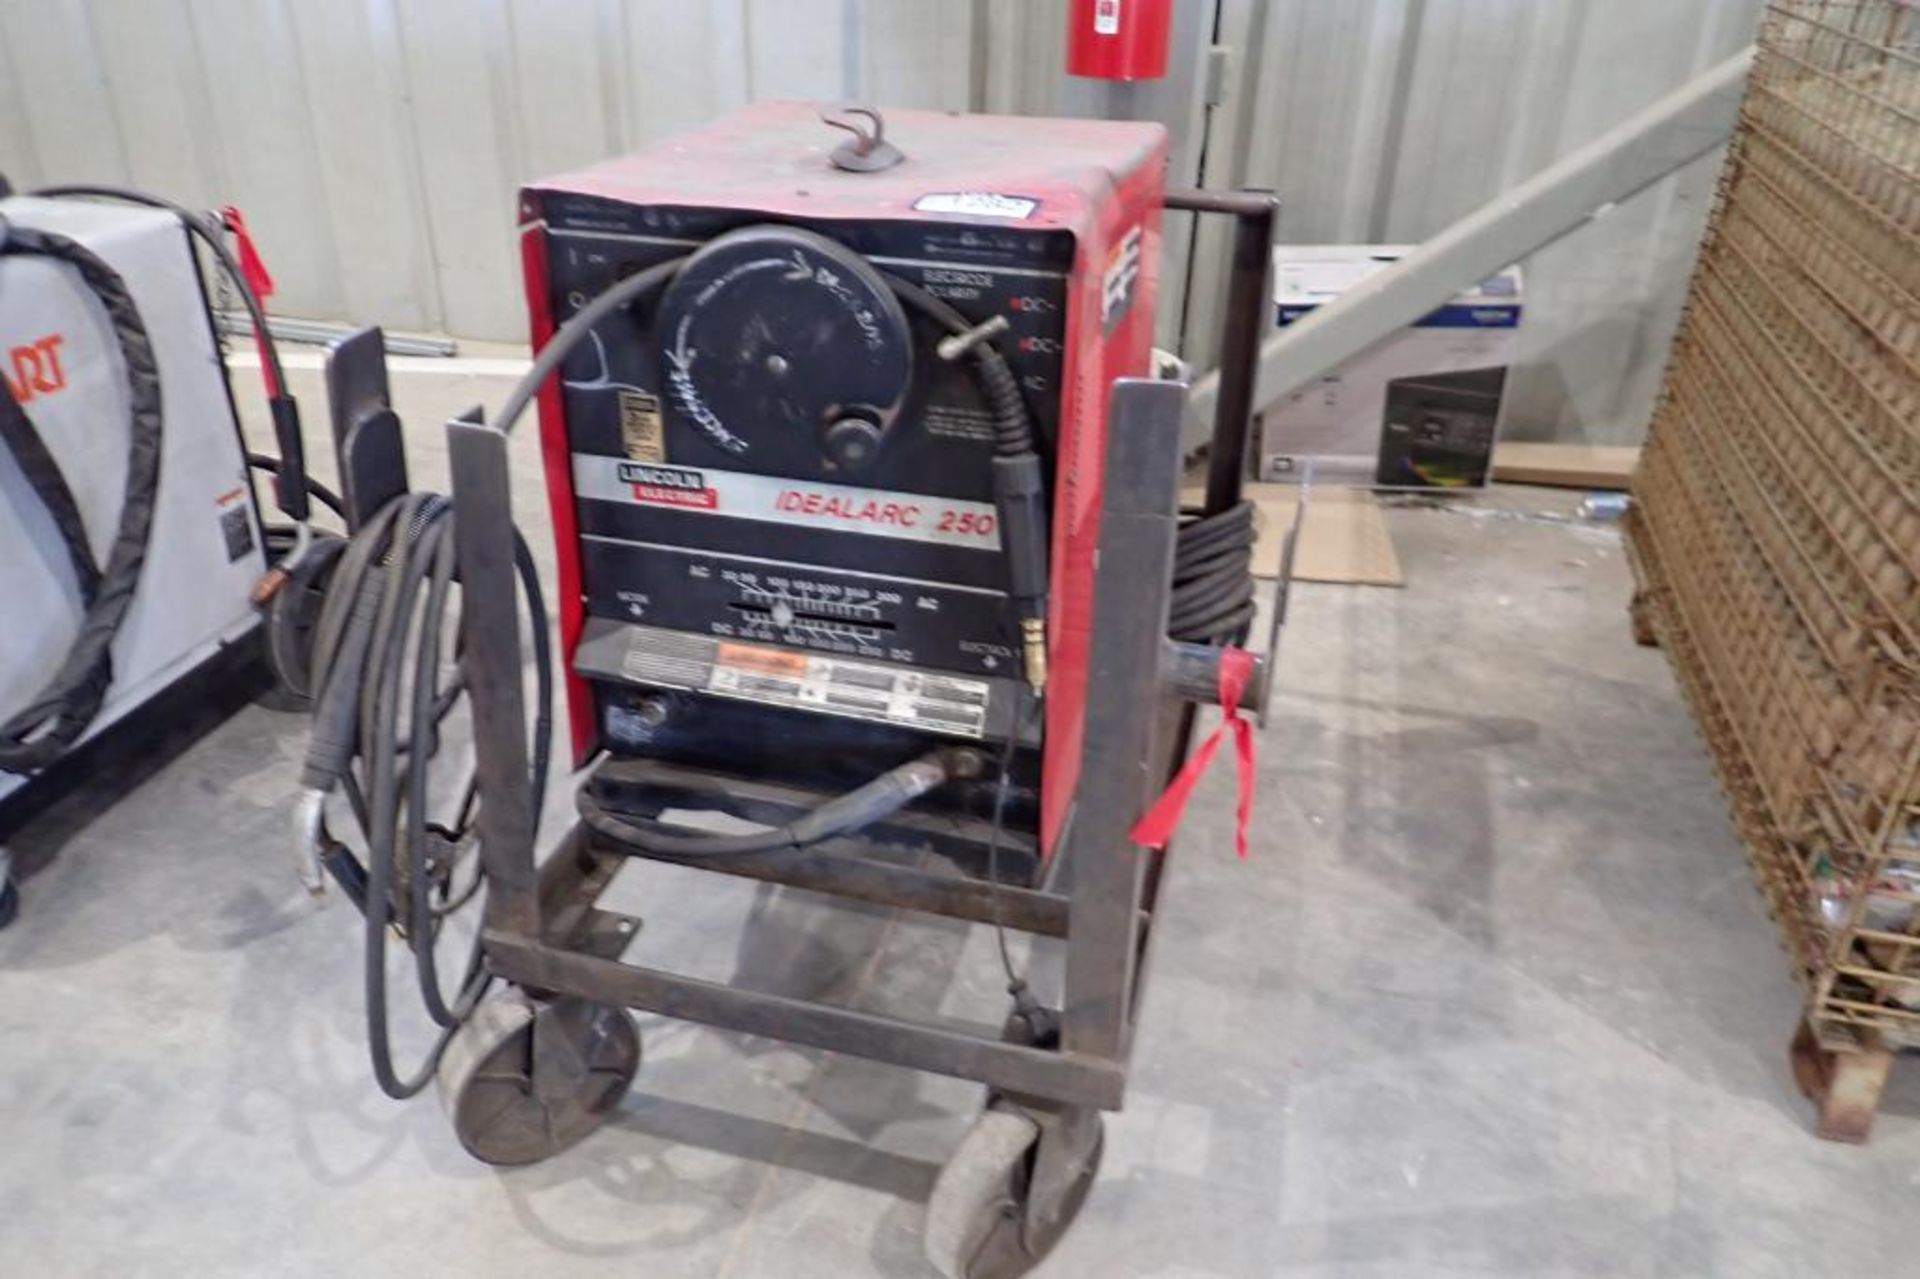 Lincoln Idealarc 250 Arc Welder w/ Cart and Cables.